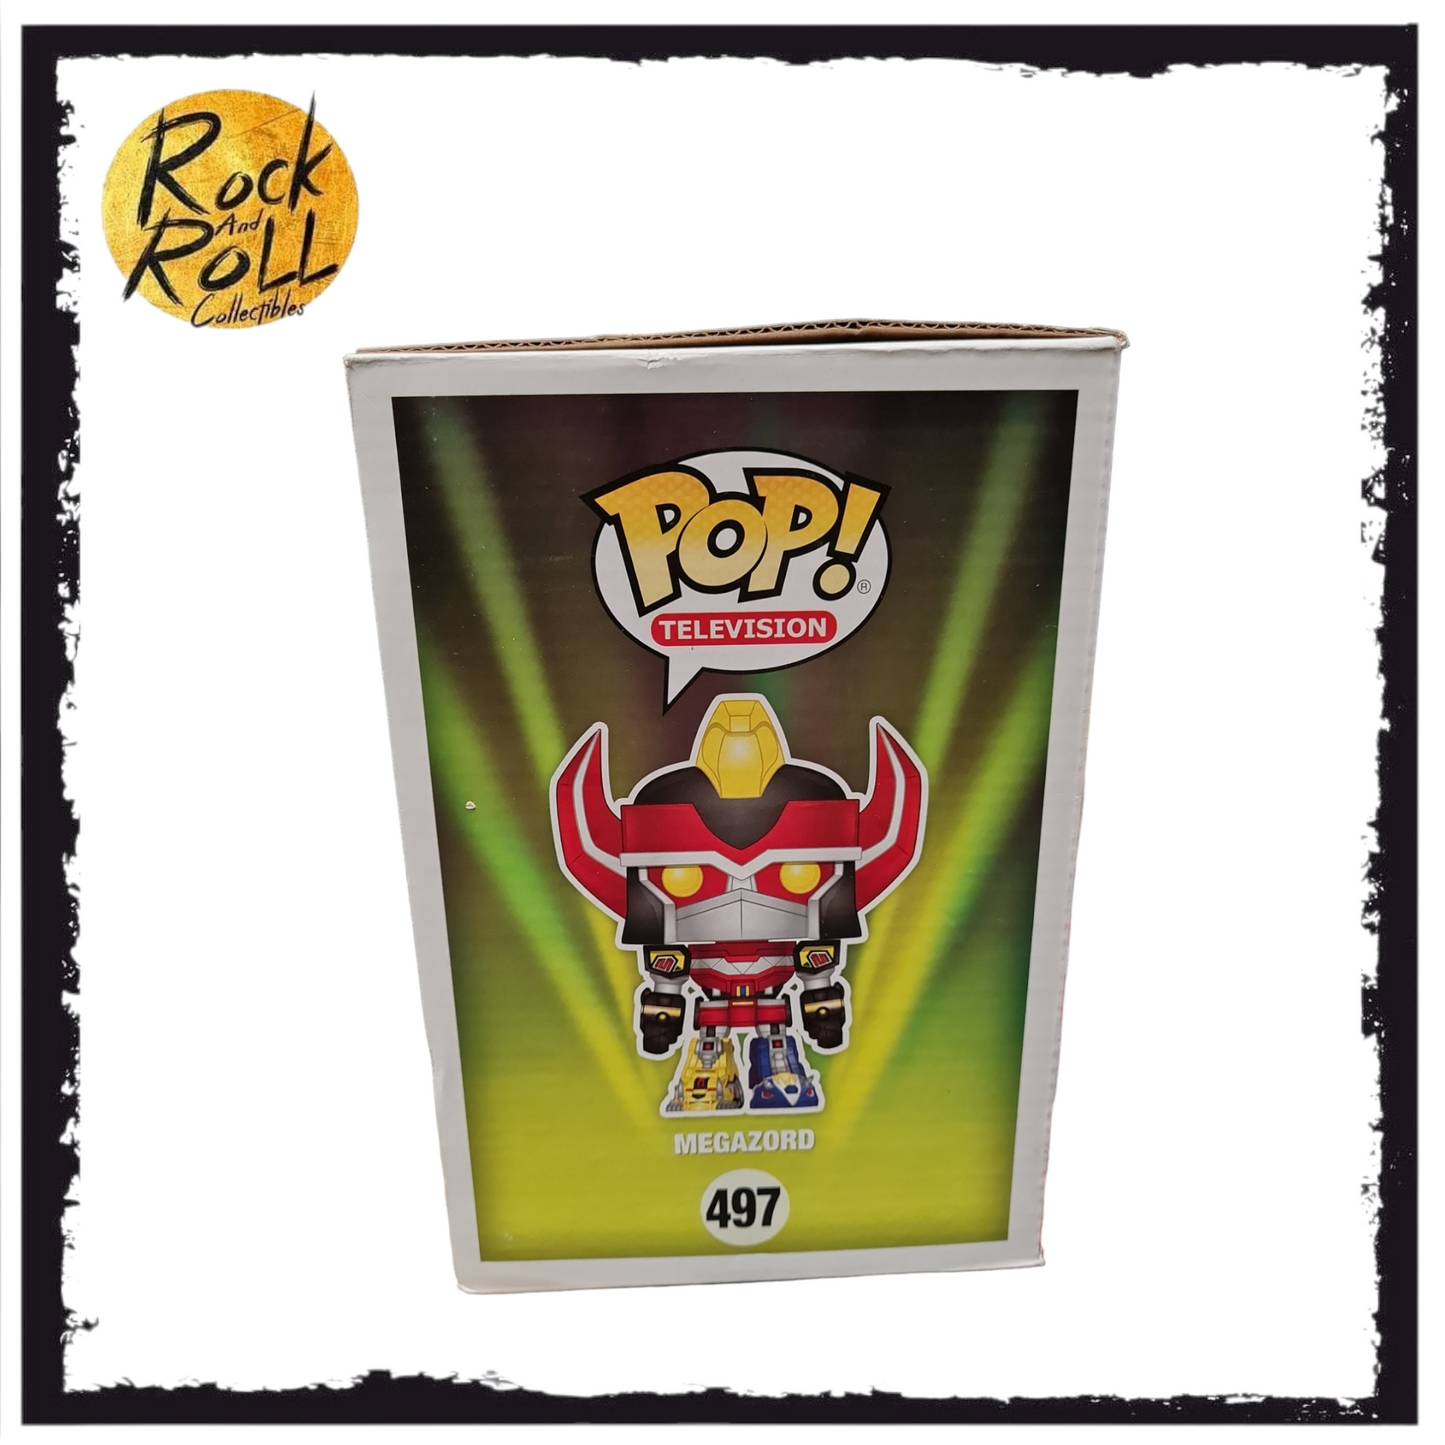 Mighty Morphin Power Rangers - Megazord 6" Funko Pop! #497 2017 Summer Convention. Condition 8/10